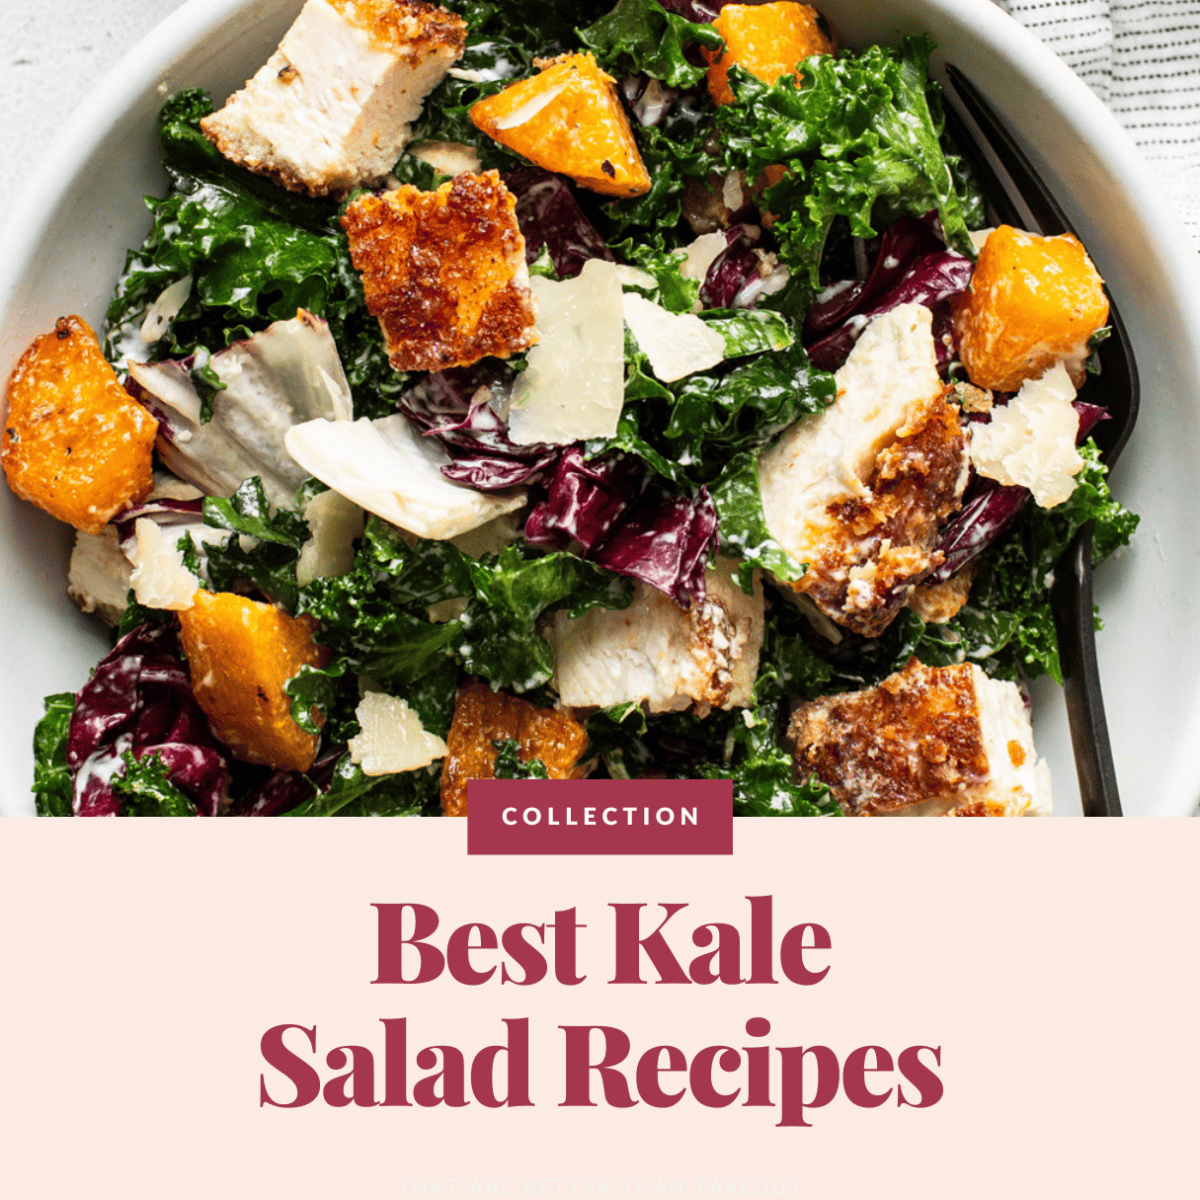 A bowl of kale salad with roasted butternut squash, grilled chicken, radicchio, and grated cheese. Text overlay reads “Collection: Best Kale Salad Recipes”. Perfect for those seeking delicious and nutritious kale salad recipes.